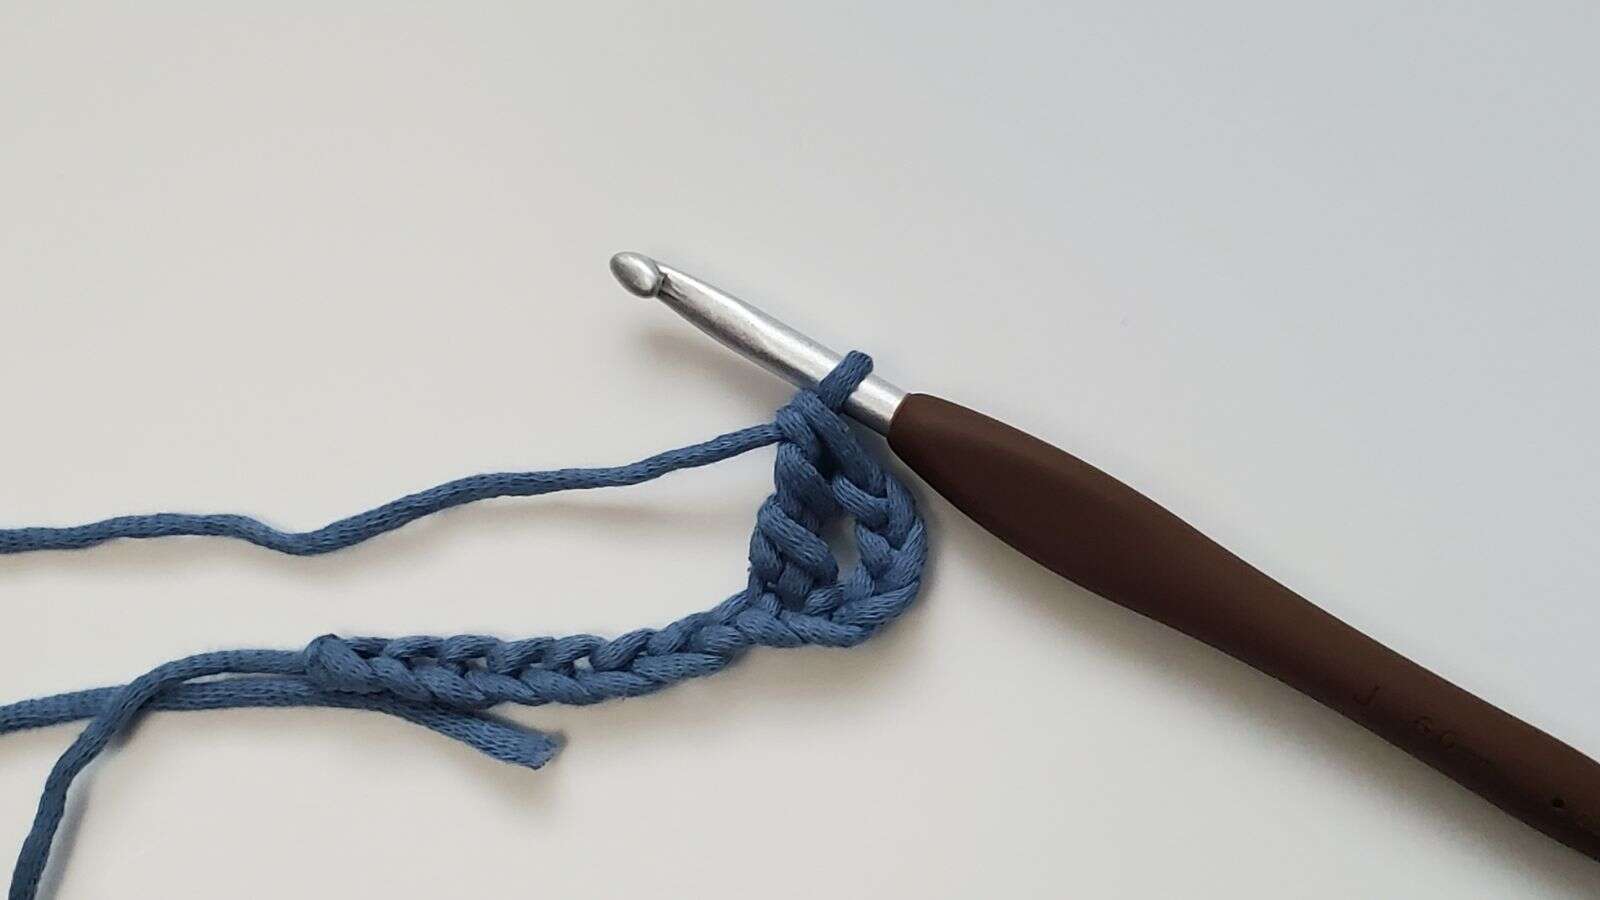 A completed triple crochet stitch on a foundation chain